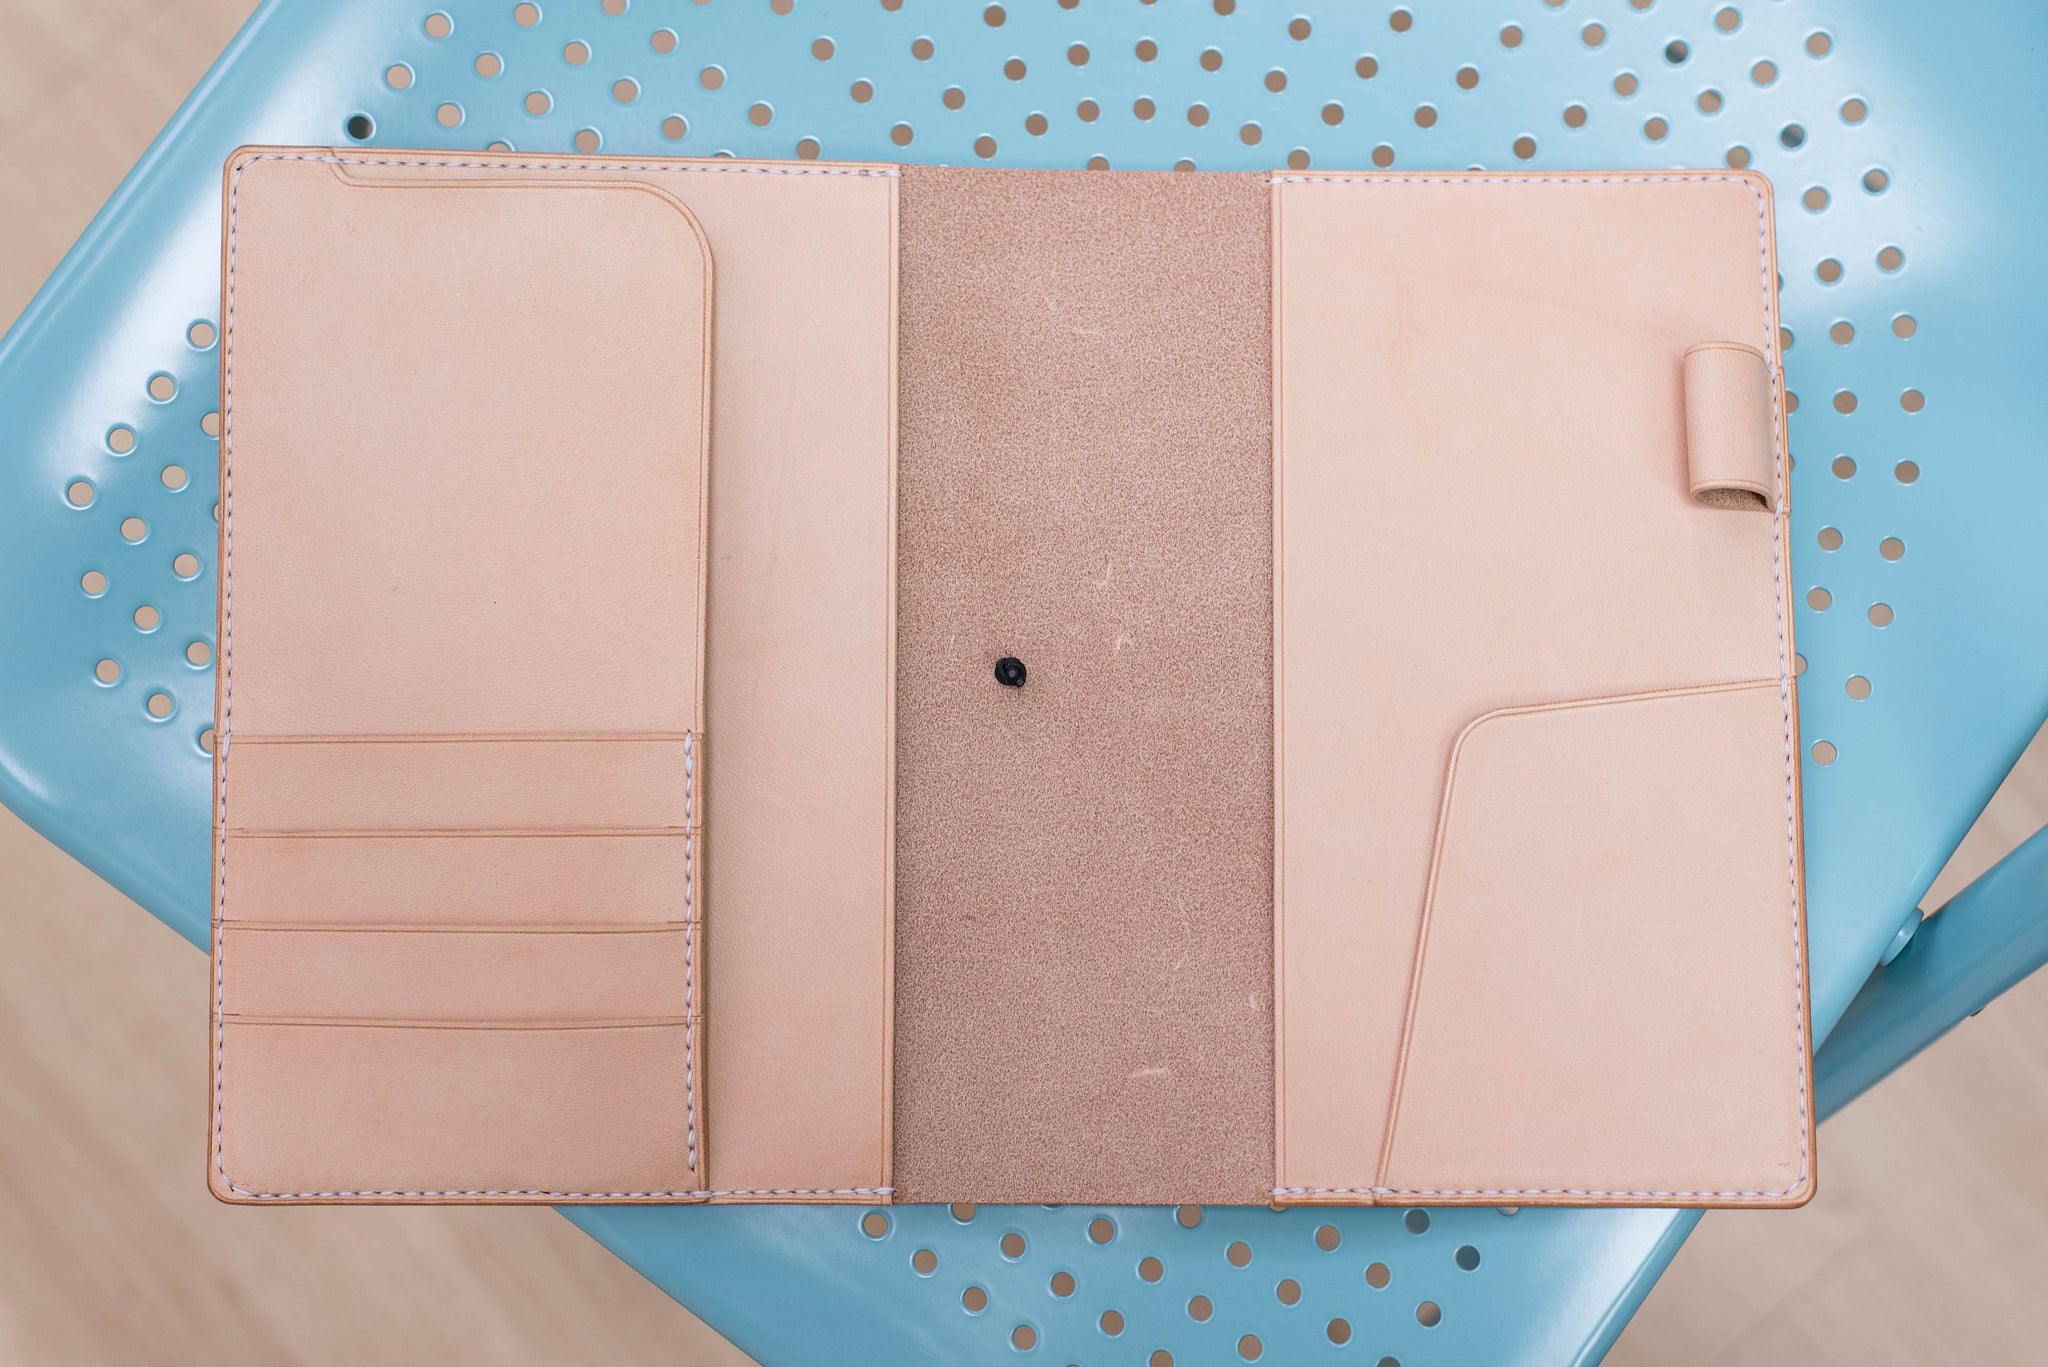 A5/Hobonichi Cousin/Seven Seas Elastic Closure Natural Leather Notebook Cover with Card pockets